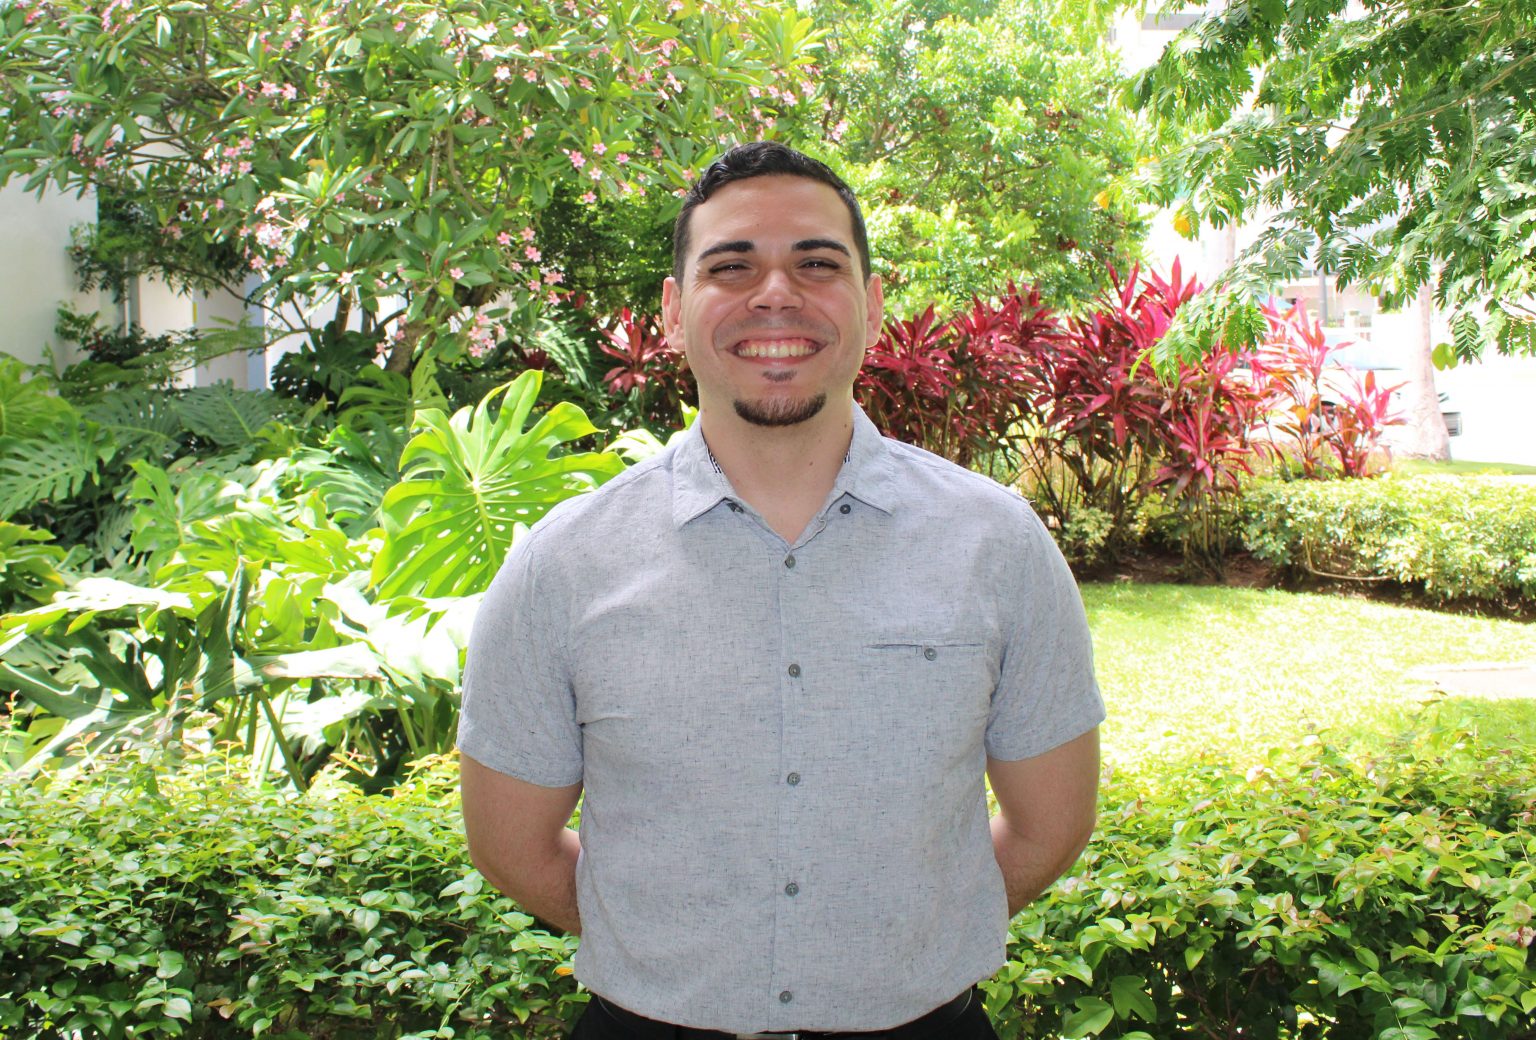 Elementary School Division Head Bradly Rivera stands in front of school greenery while smiling and wearing a grey button up shirt.